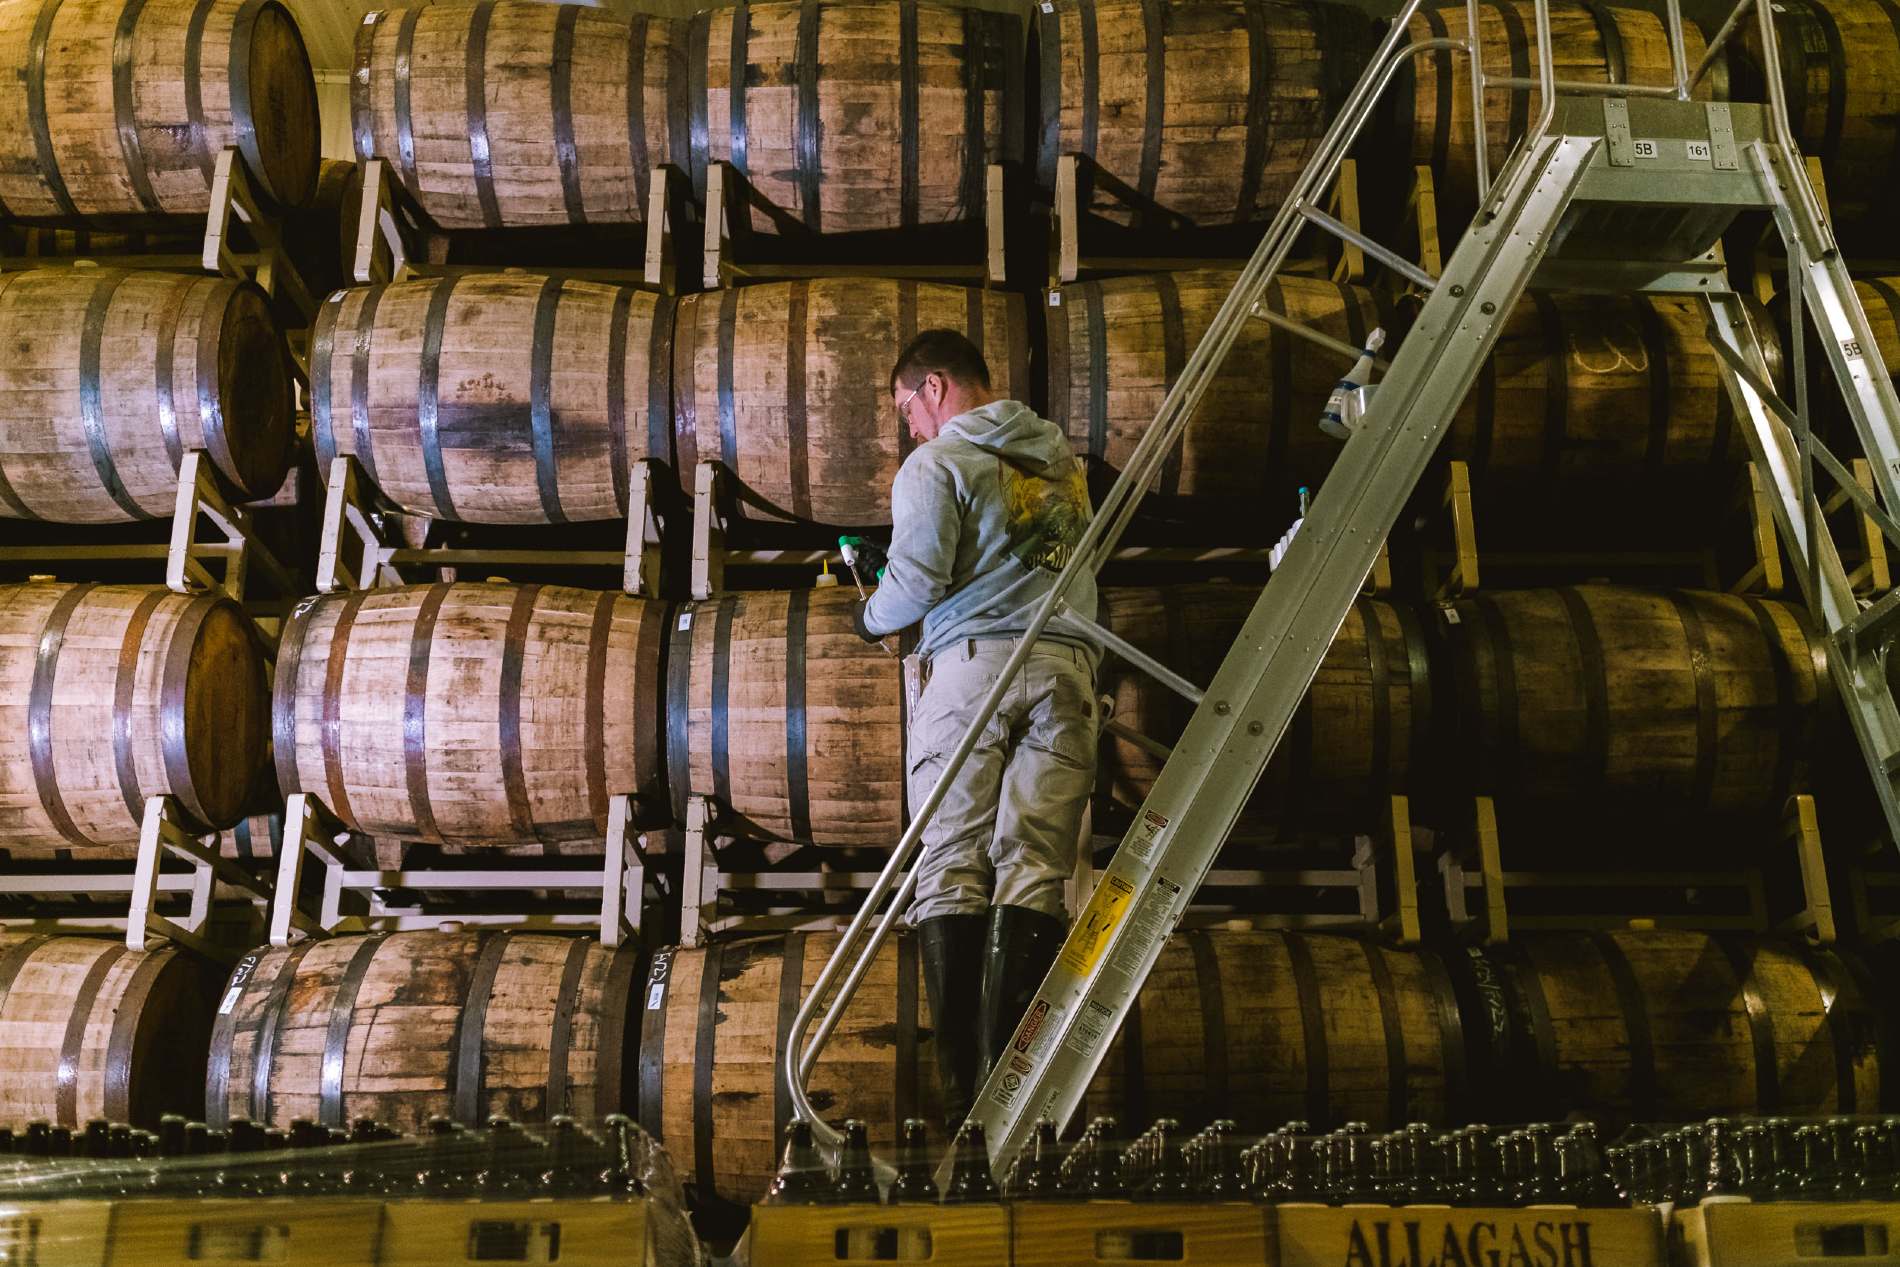 Allagash employee taking samples of beer from barrels of Curieux